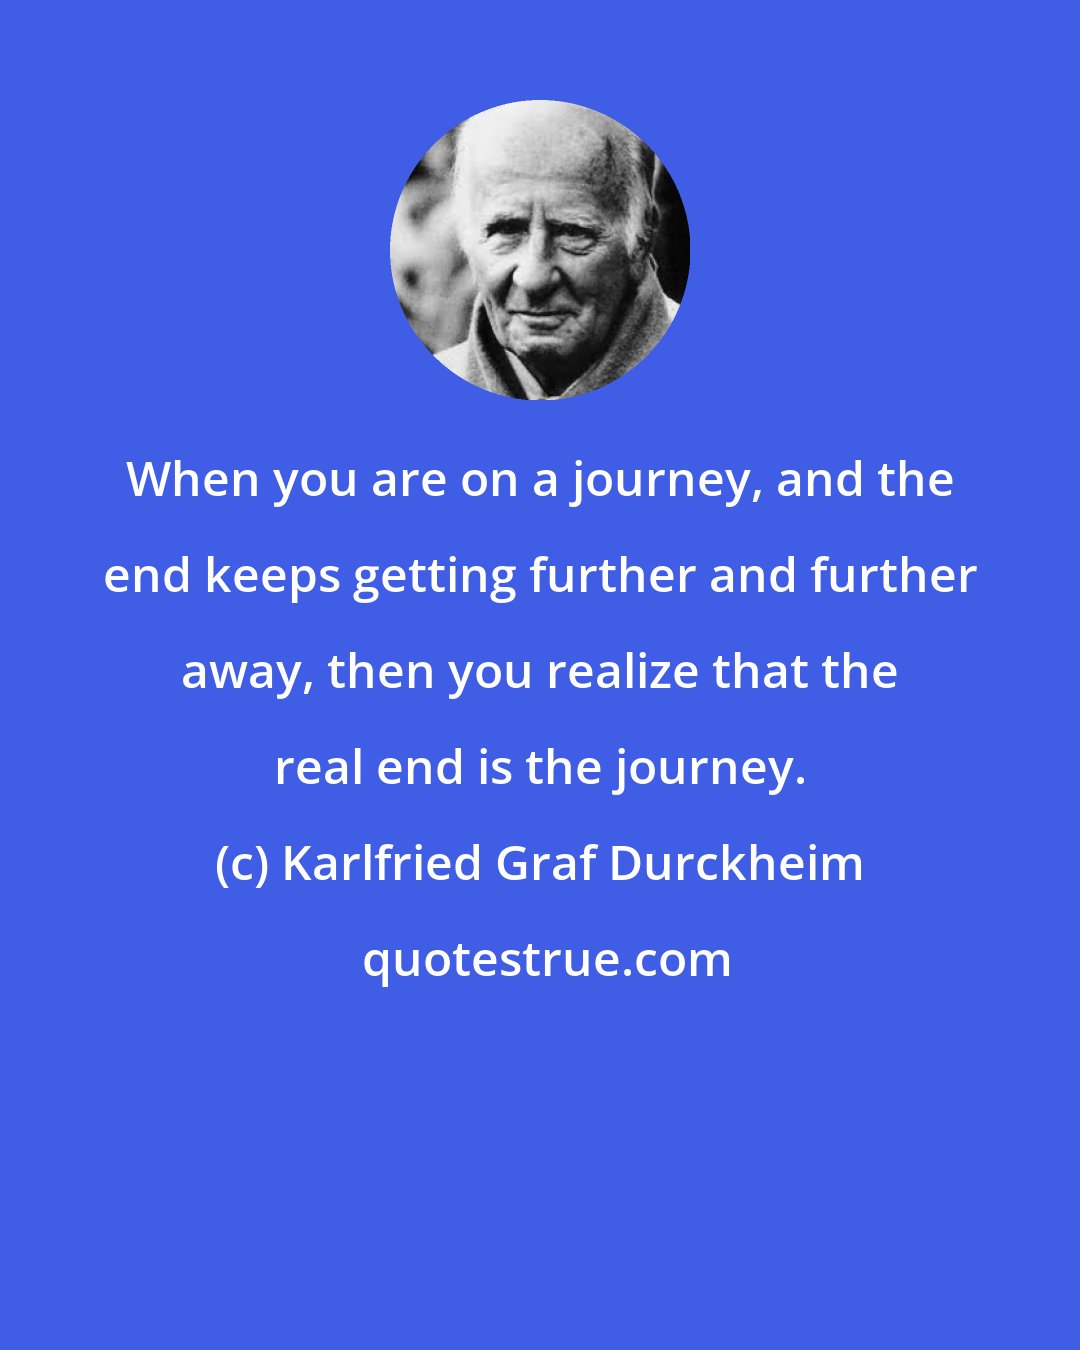 Karlfried Graf Durckheim: When you are on a journey, and the end keeps getting further and further away, then you realize that the real end is the journey.